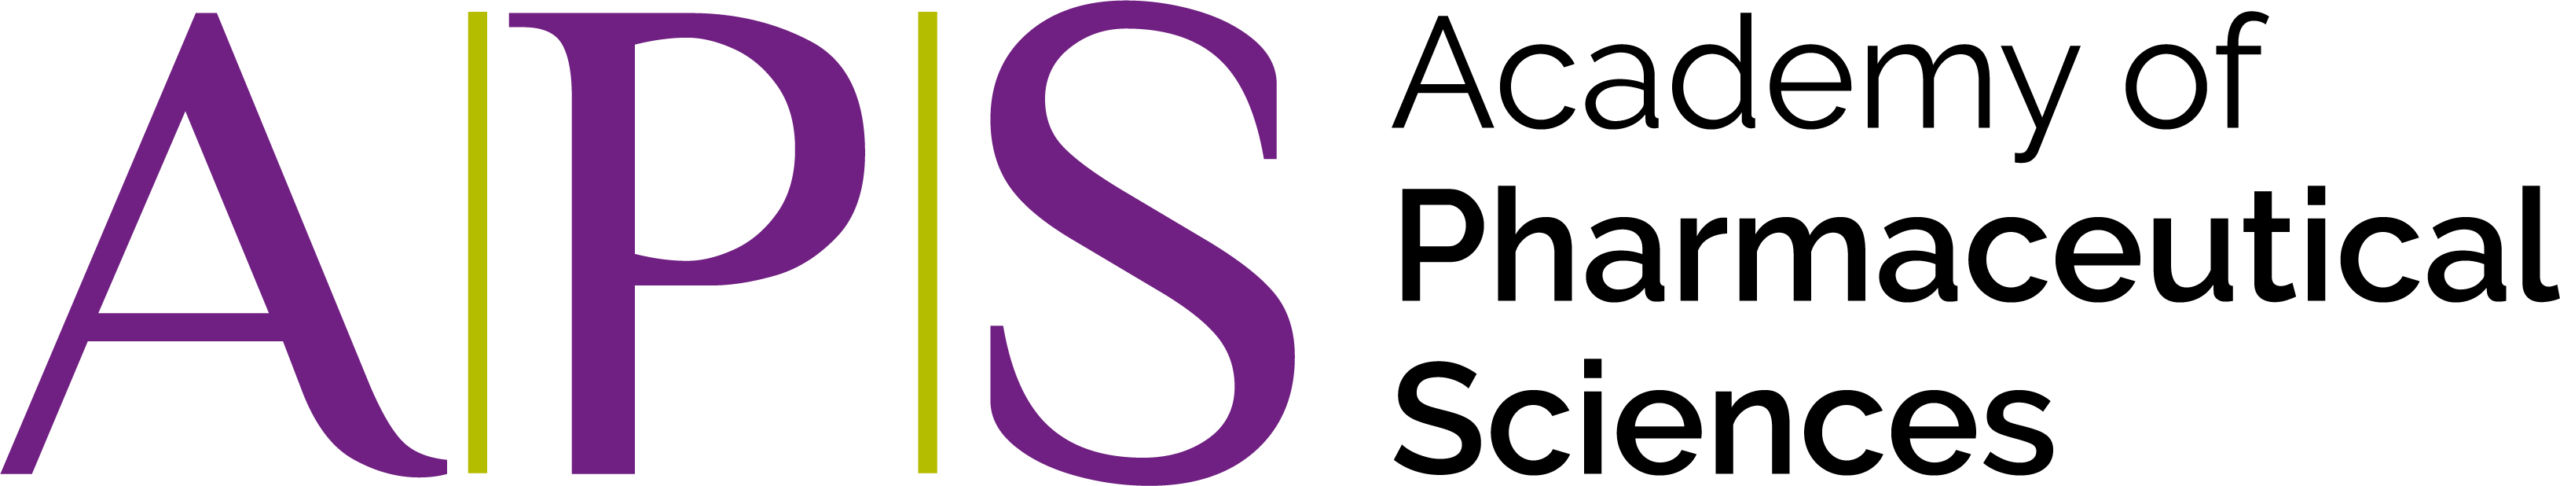 The Academy of Pharmaceutical Sciences Logo